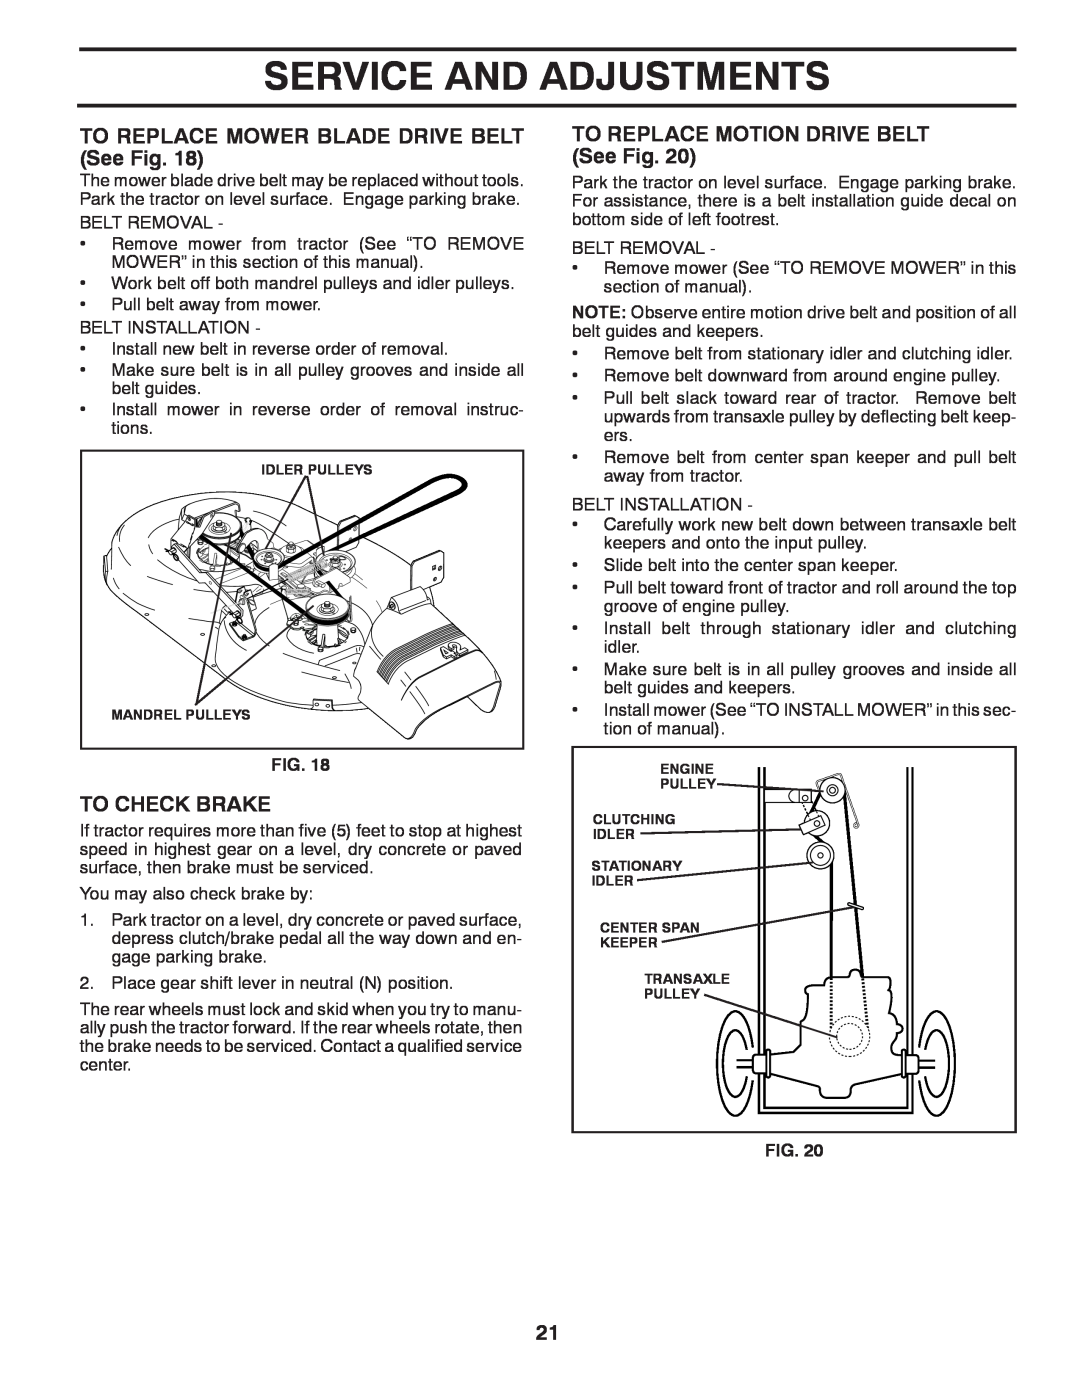 Poulan 96012006904 manual TO REPLACE MOWER BLADE DRIVE BELT See Fig, To Check Brake, TO REPLACE MOTION DRIVE BELT See Fig 